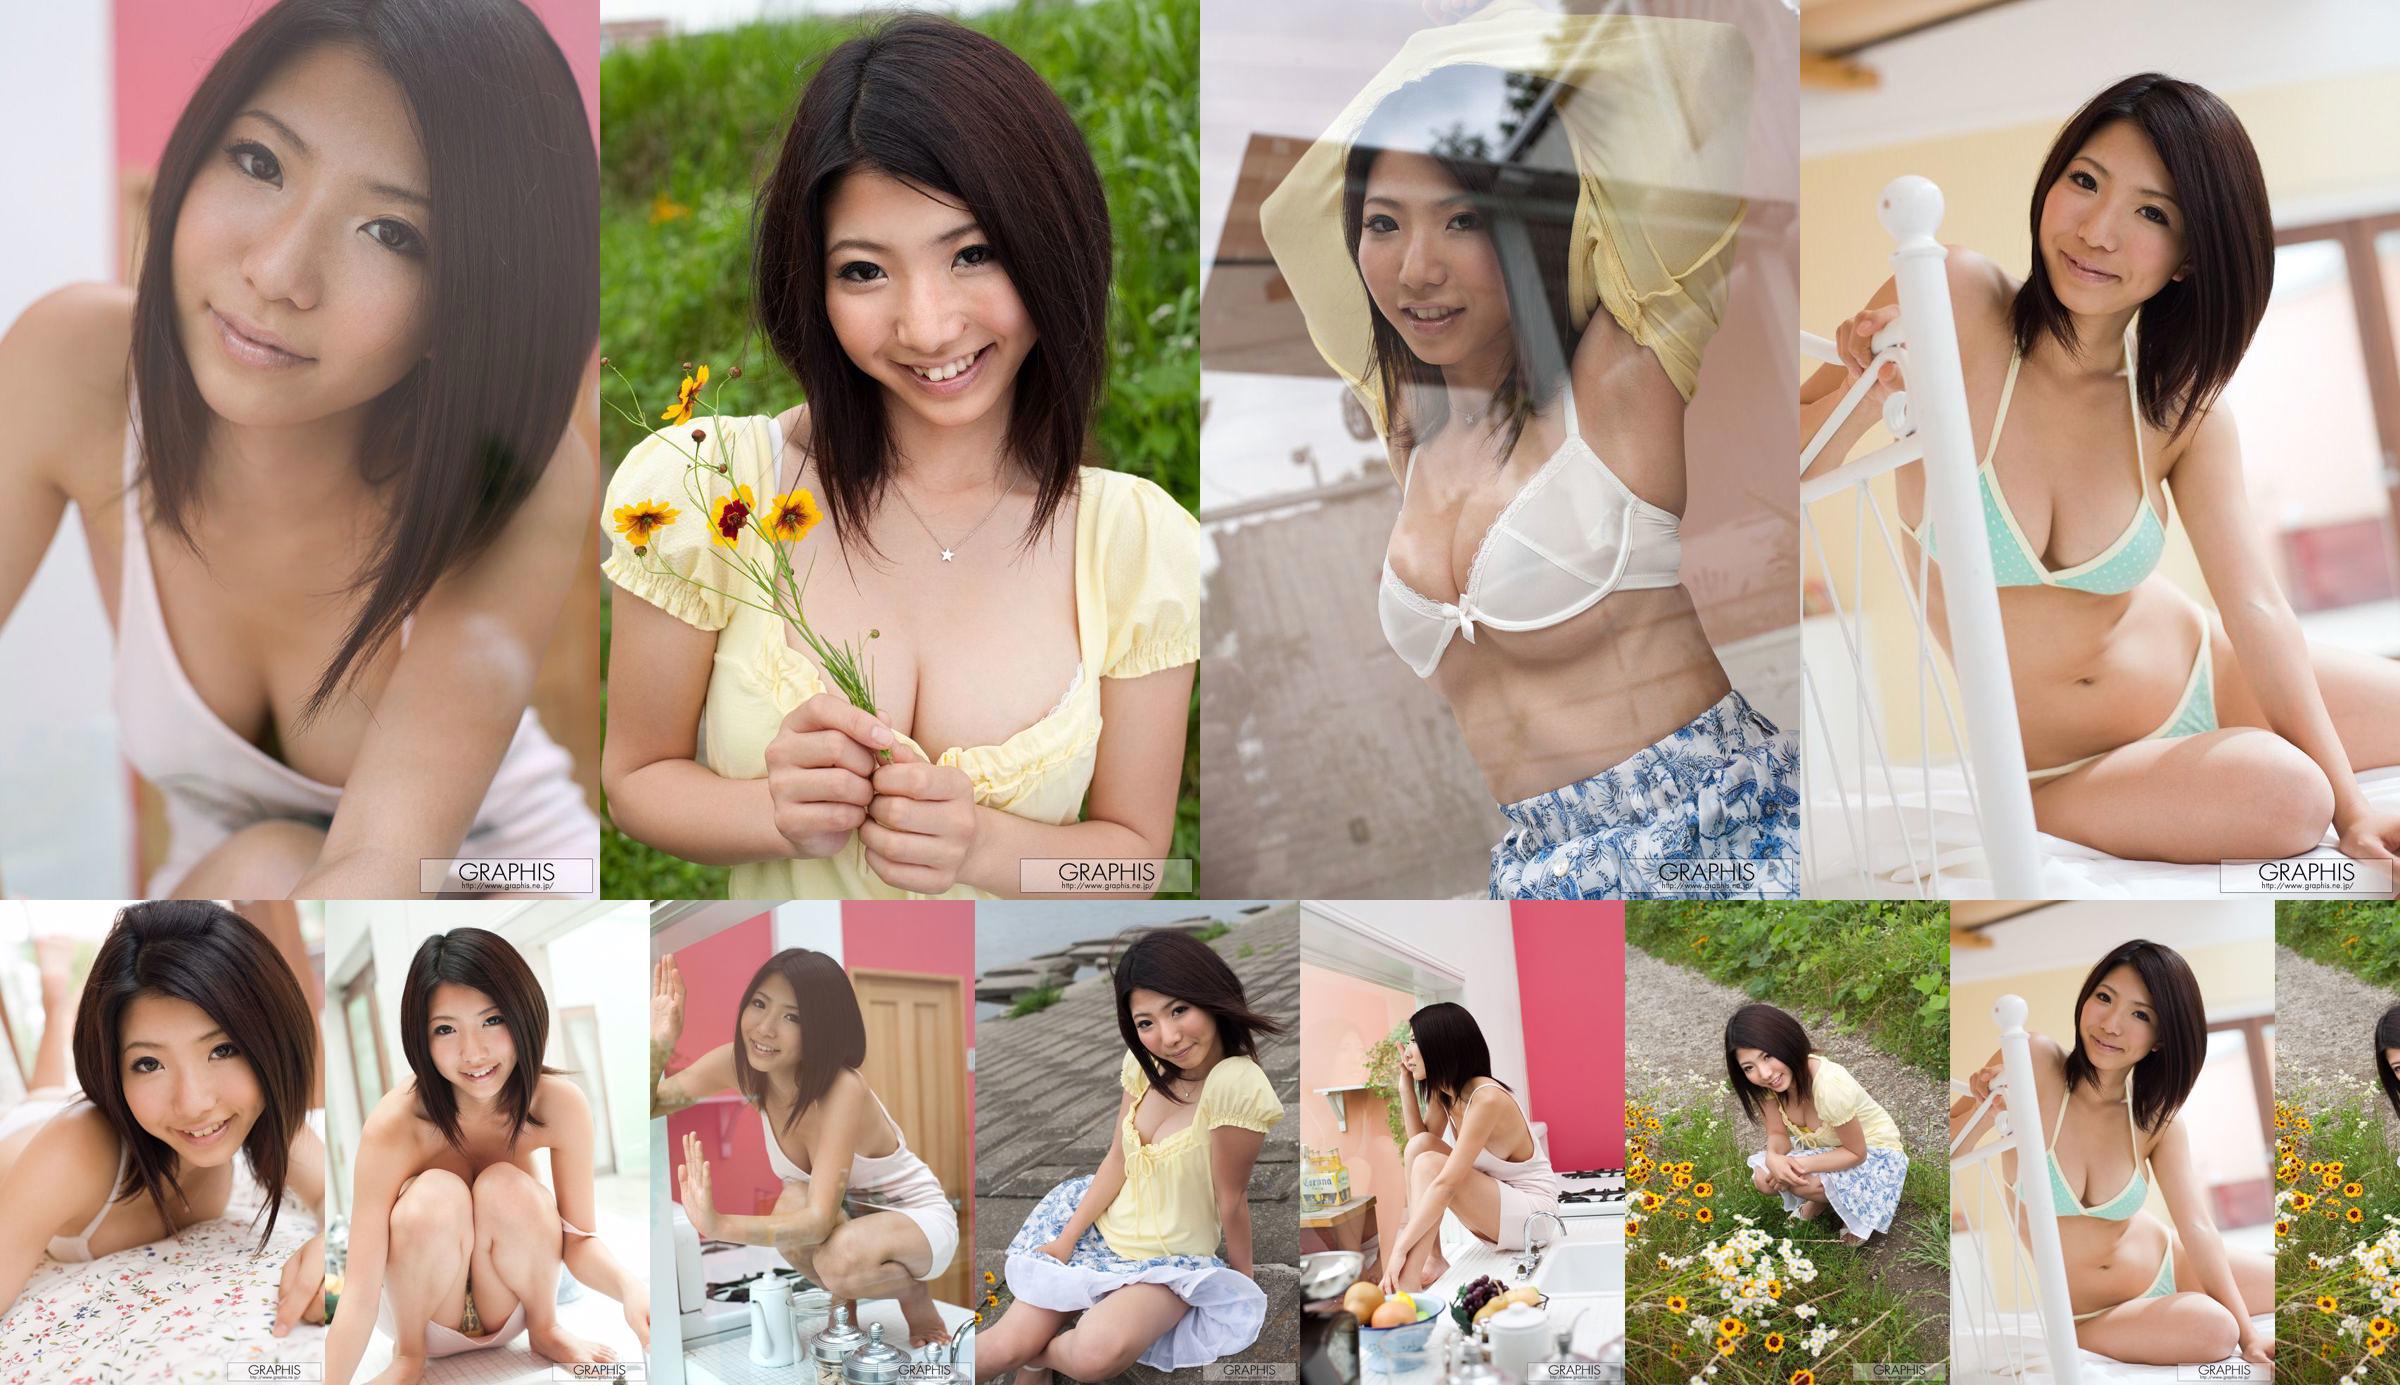 An Ann 《Simple and Innocent》 [Graphis] Gals No.5bdb42 Page 1